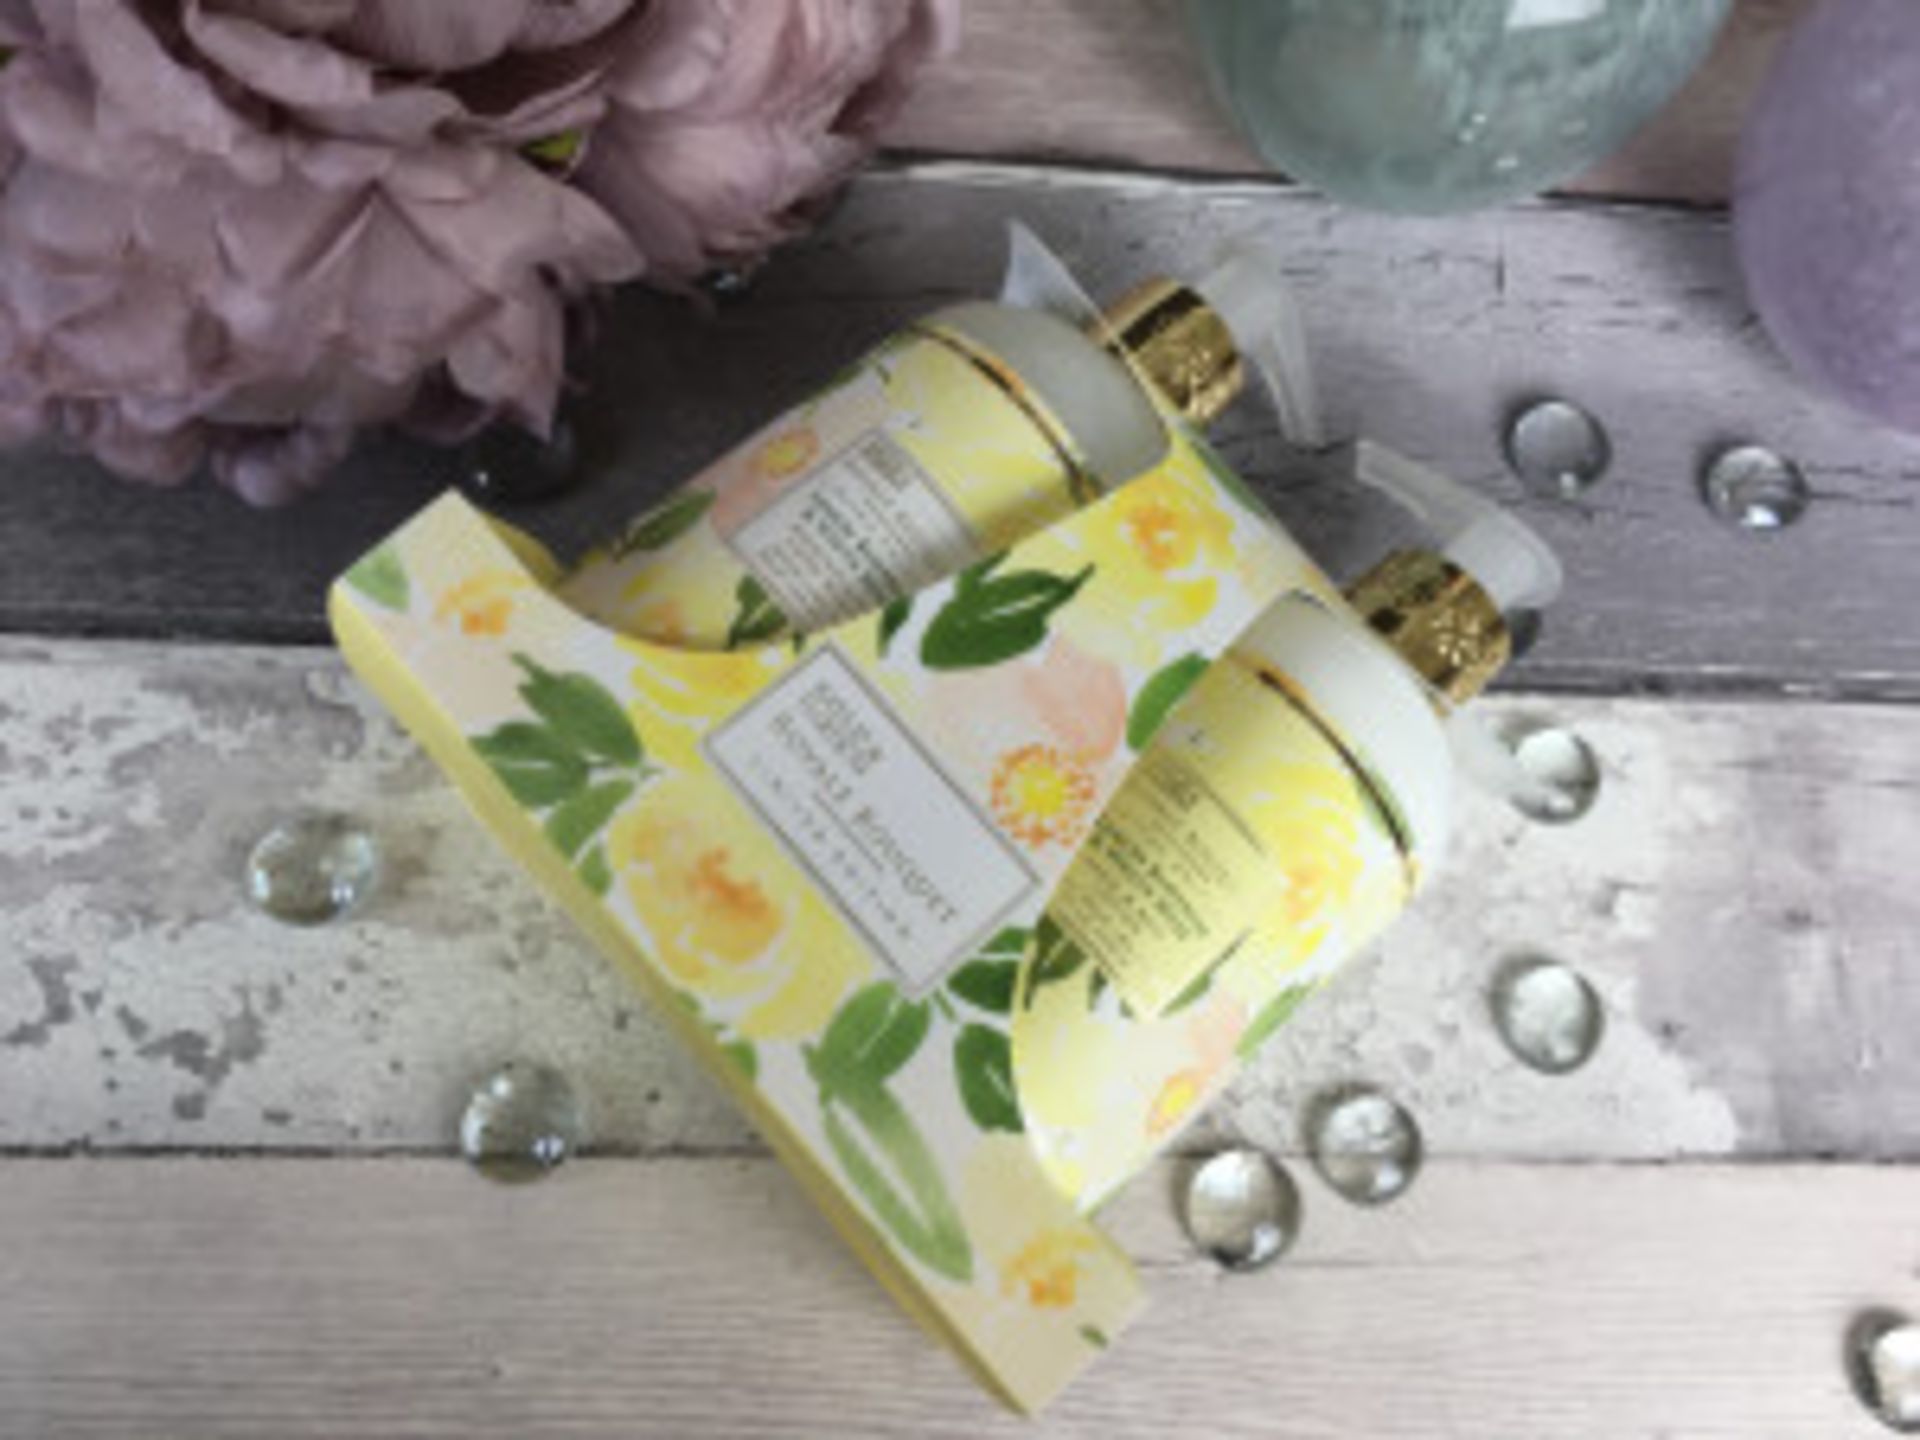 V *TRADE QTY* Brand New Baylis and Harding Royal Bouquet Limited Edition Lemon Blossom and White